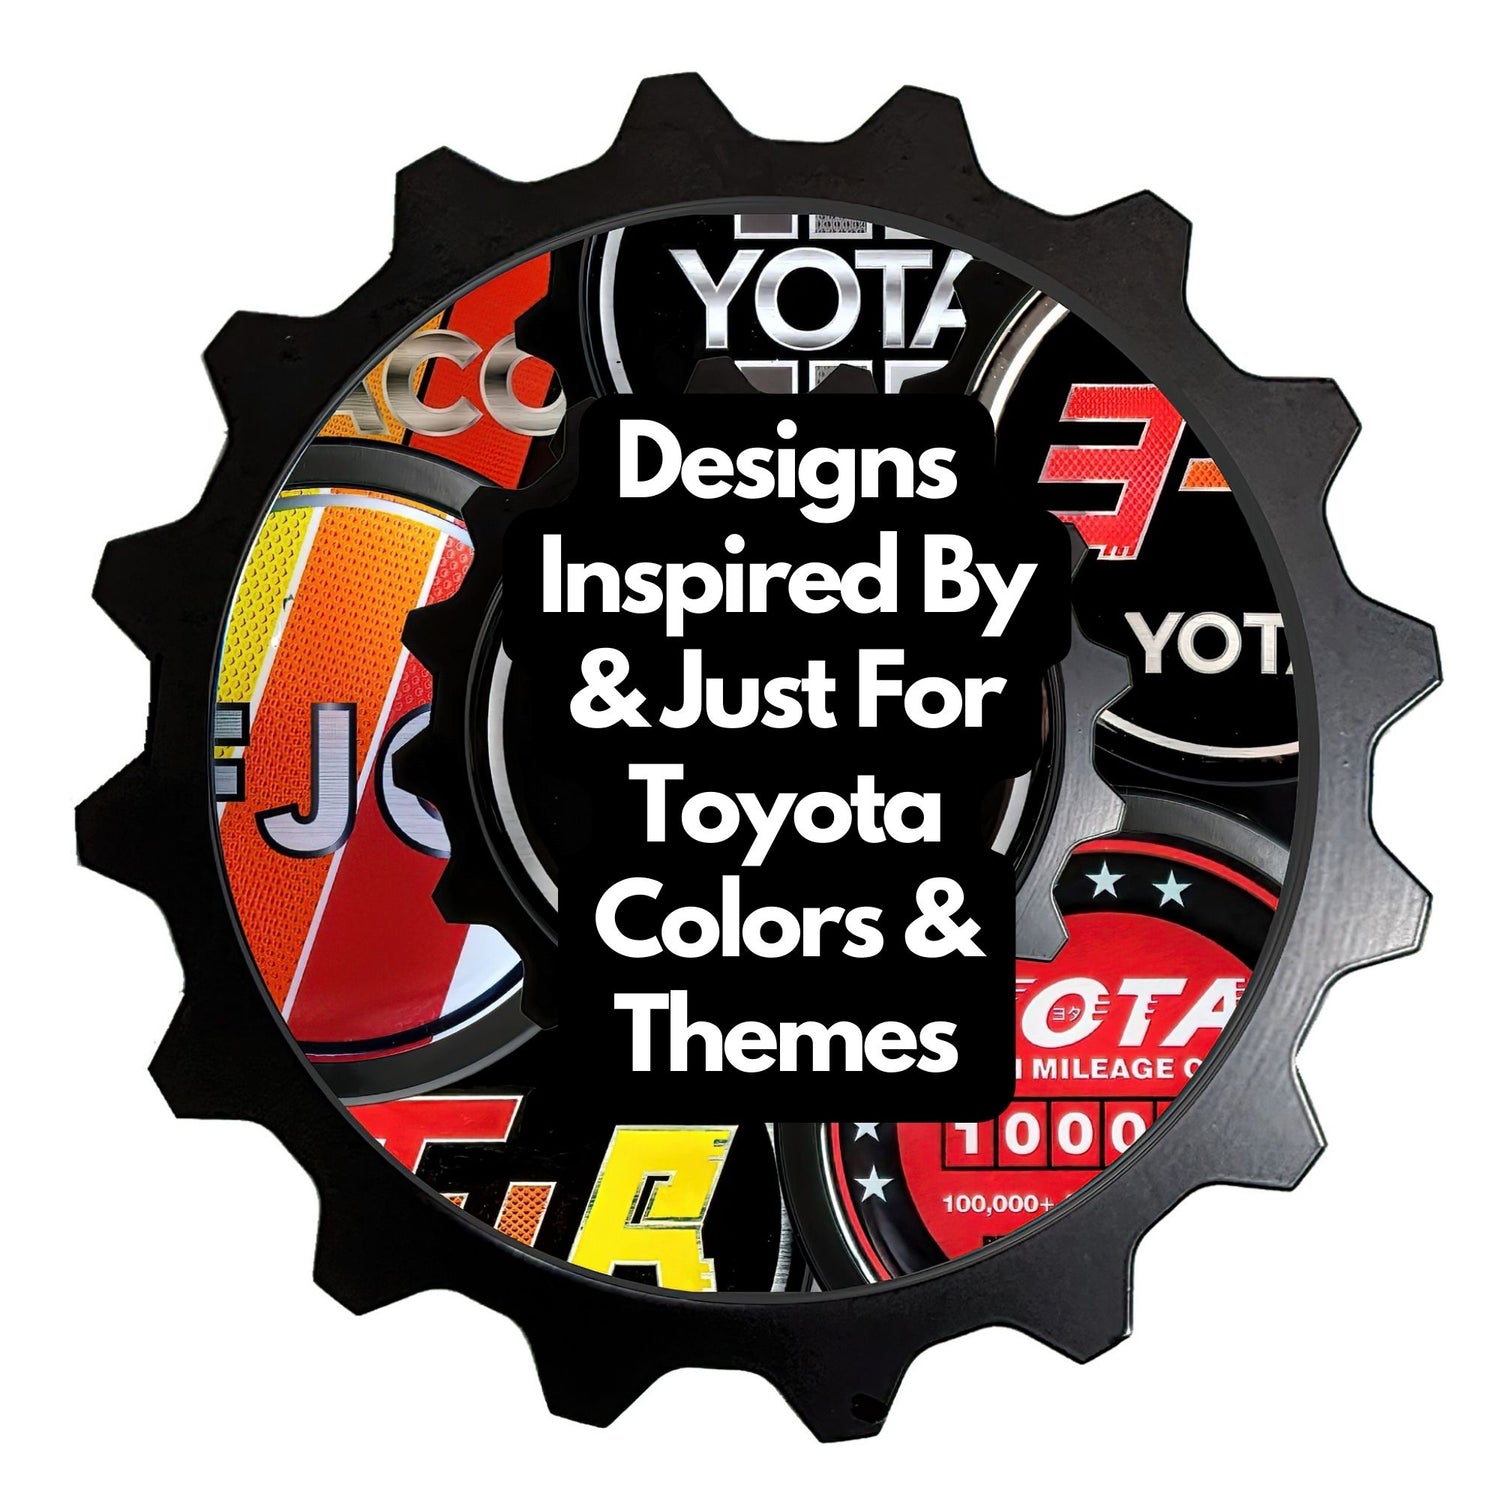 Badges - A Collection of Artwork Geared To Toyota Themes & Colors